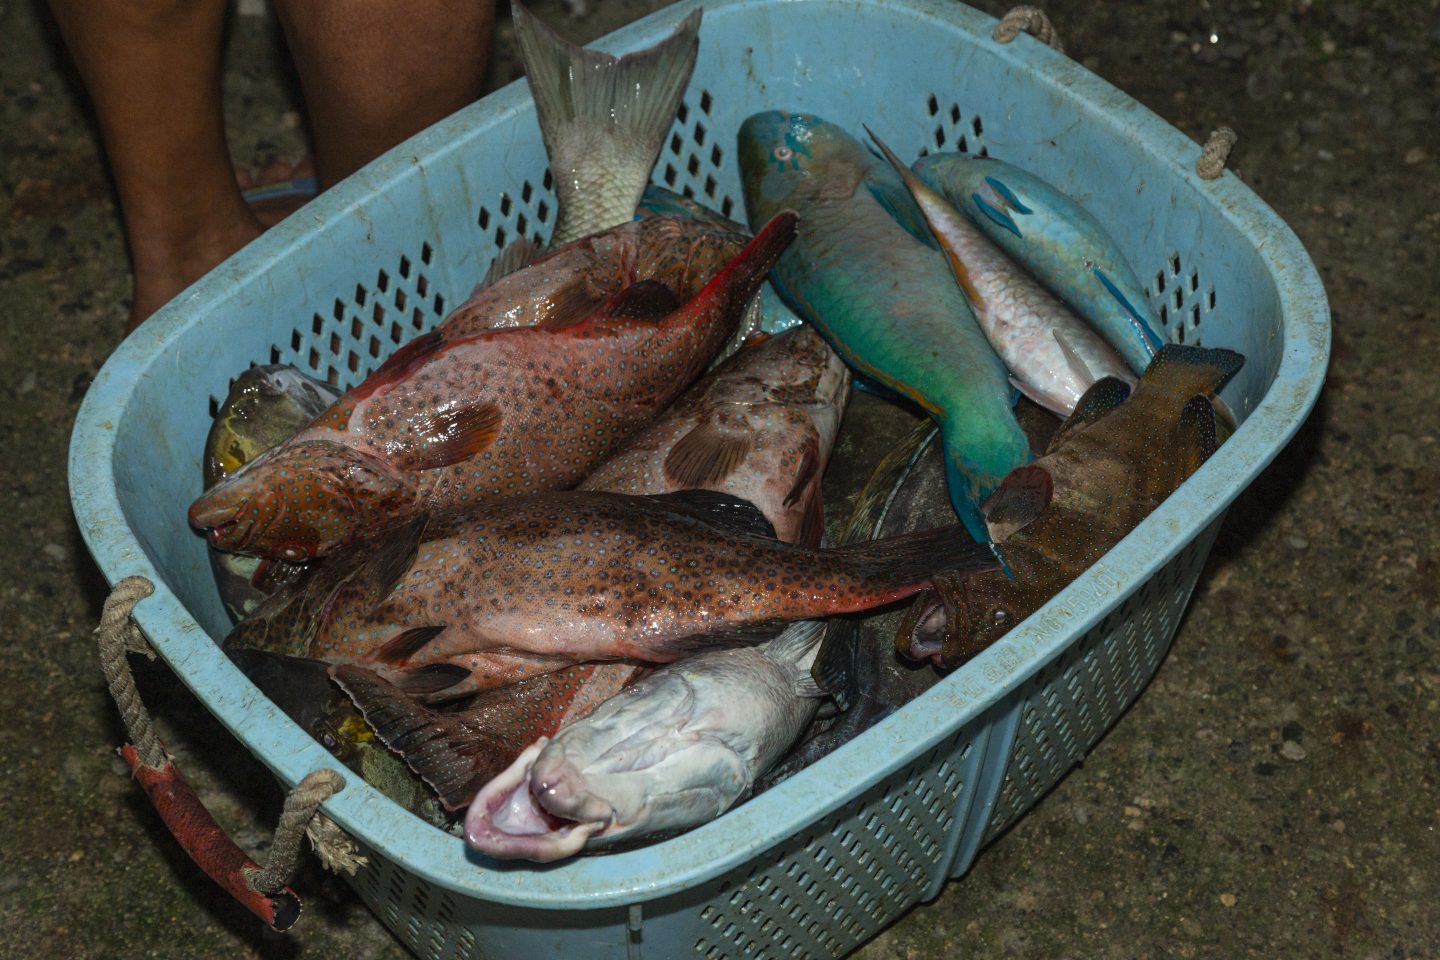 With foreign commercial fleets no longer supplying Palau’s domestic market with tuna and bycatch, local fishers are catching more reef fish in an effort to meet demand.